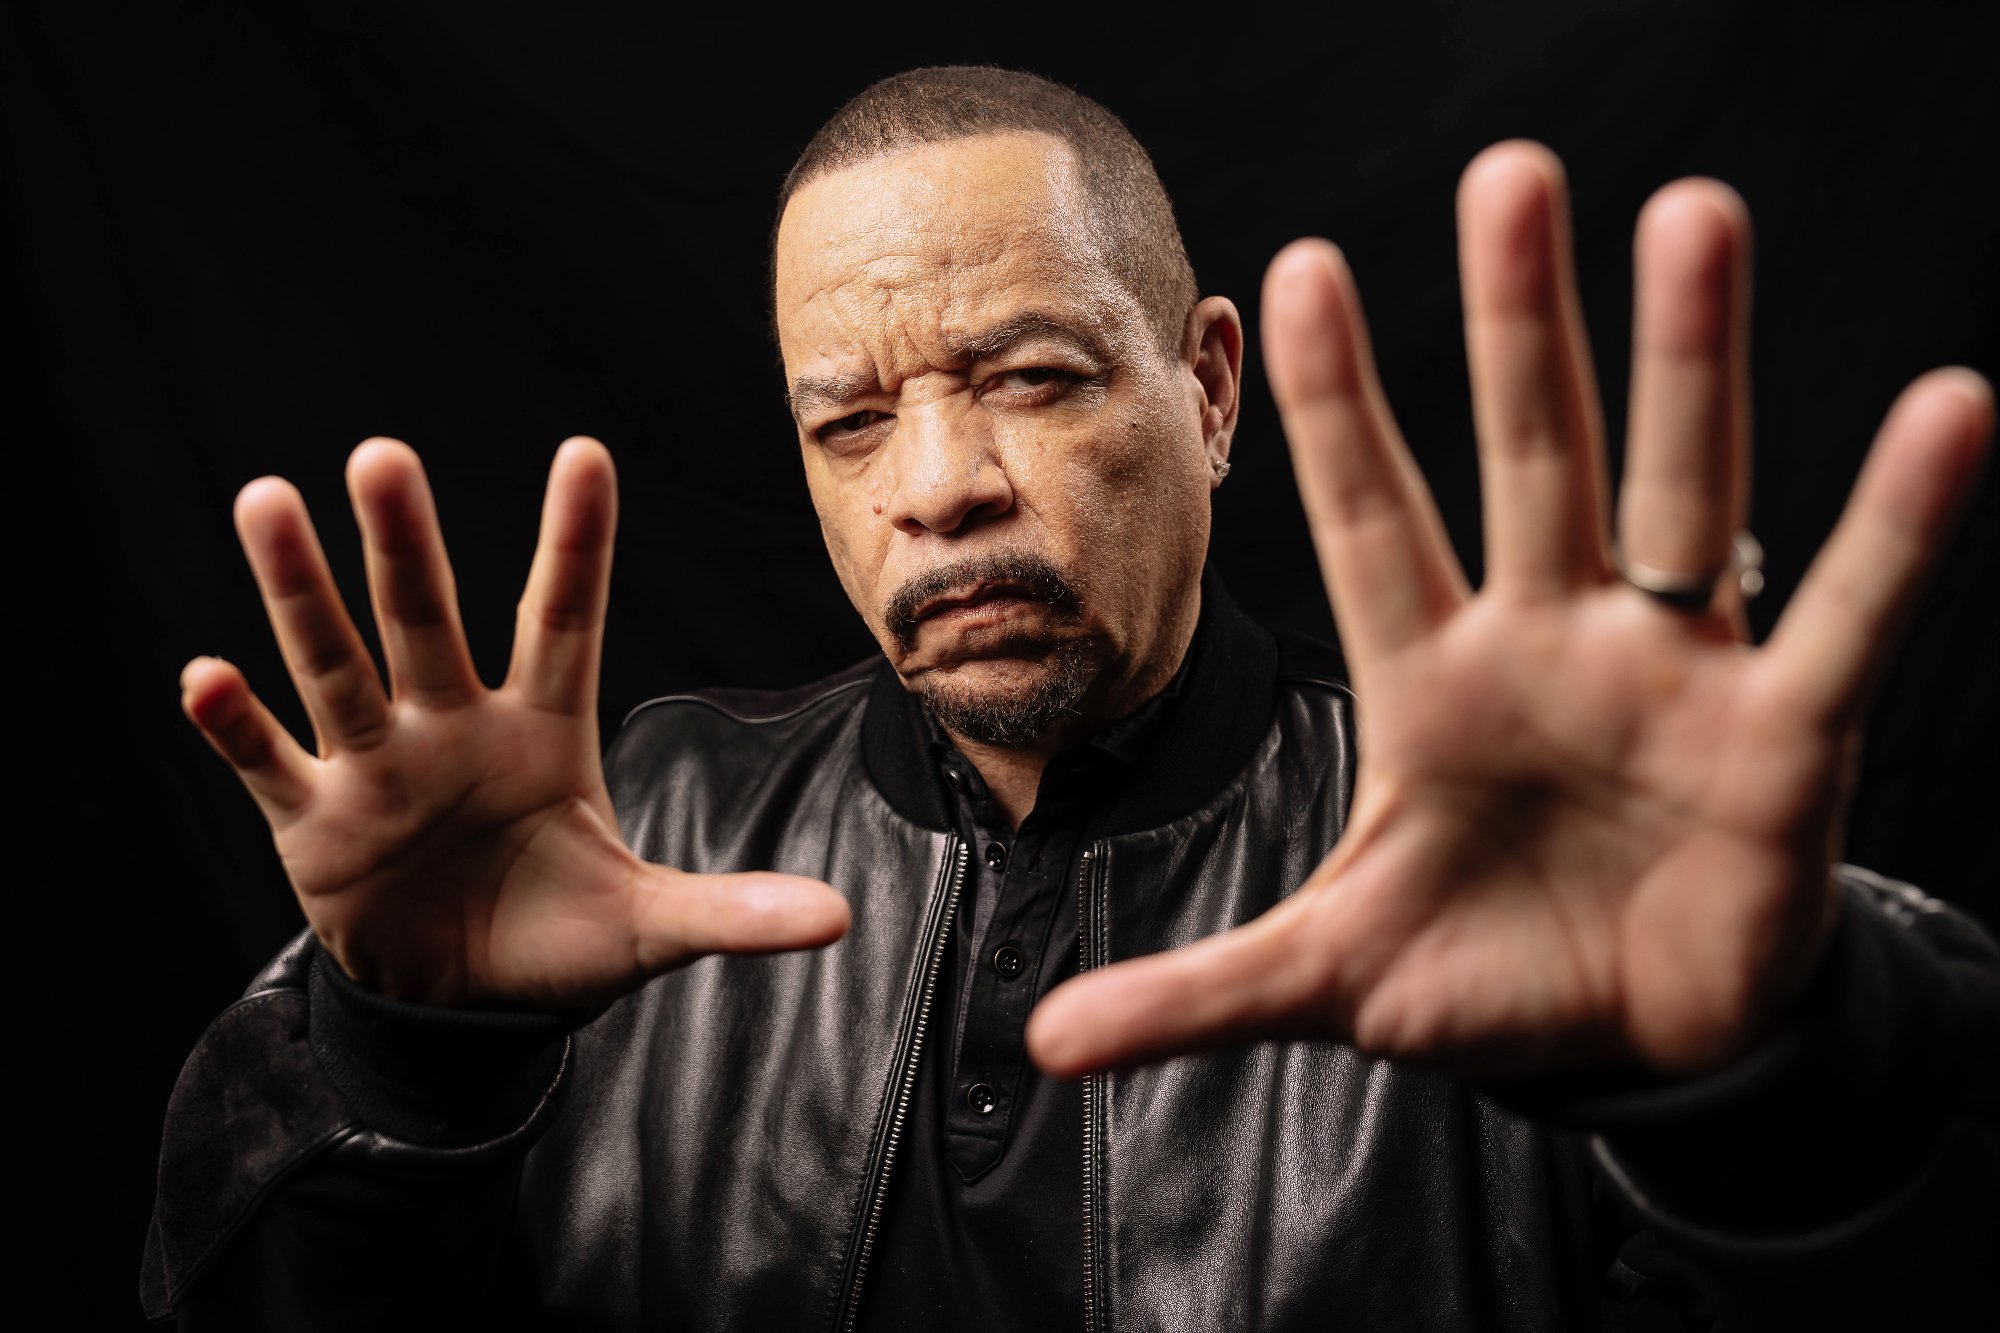 A photo of Ice-T holding out his hands